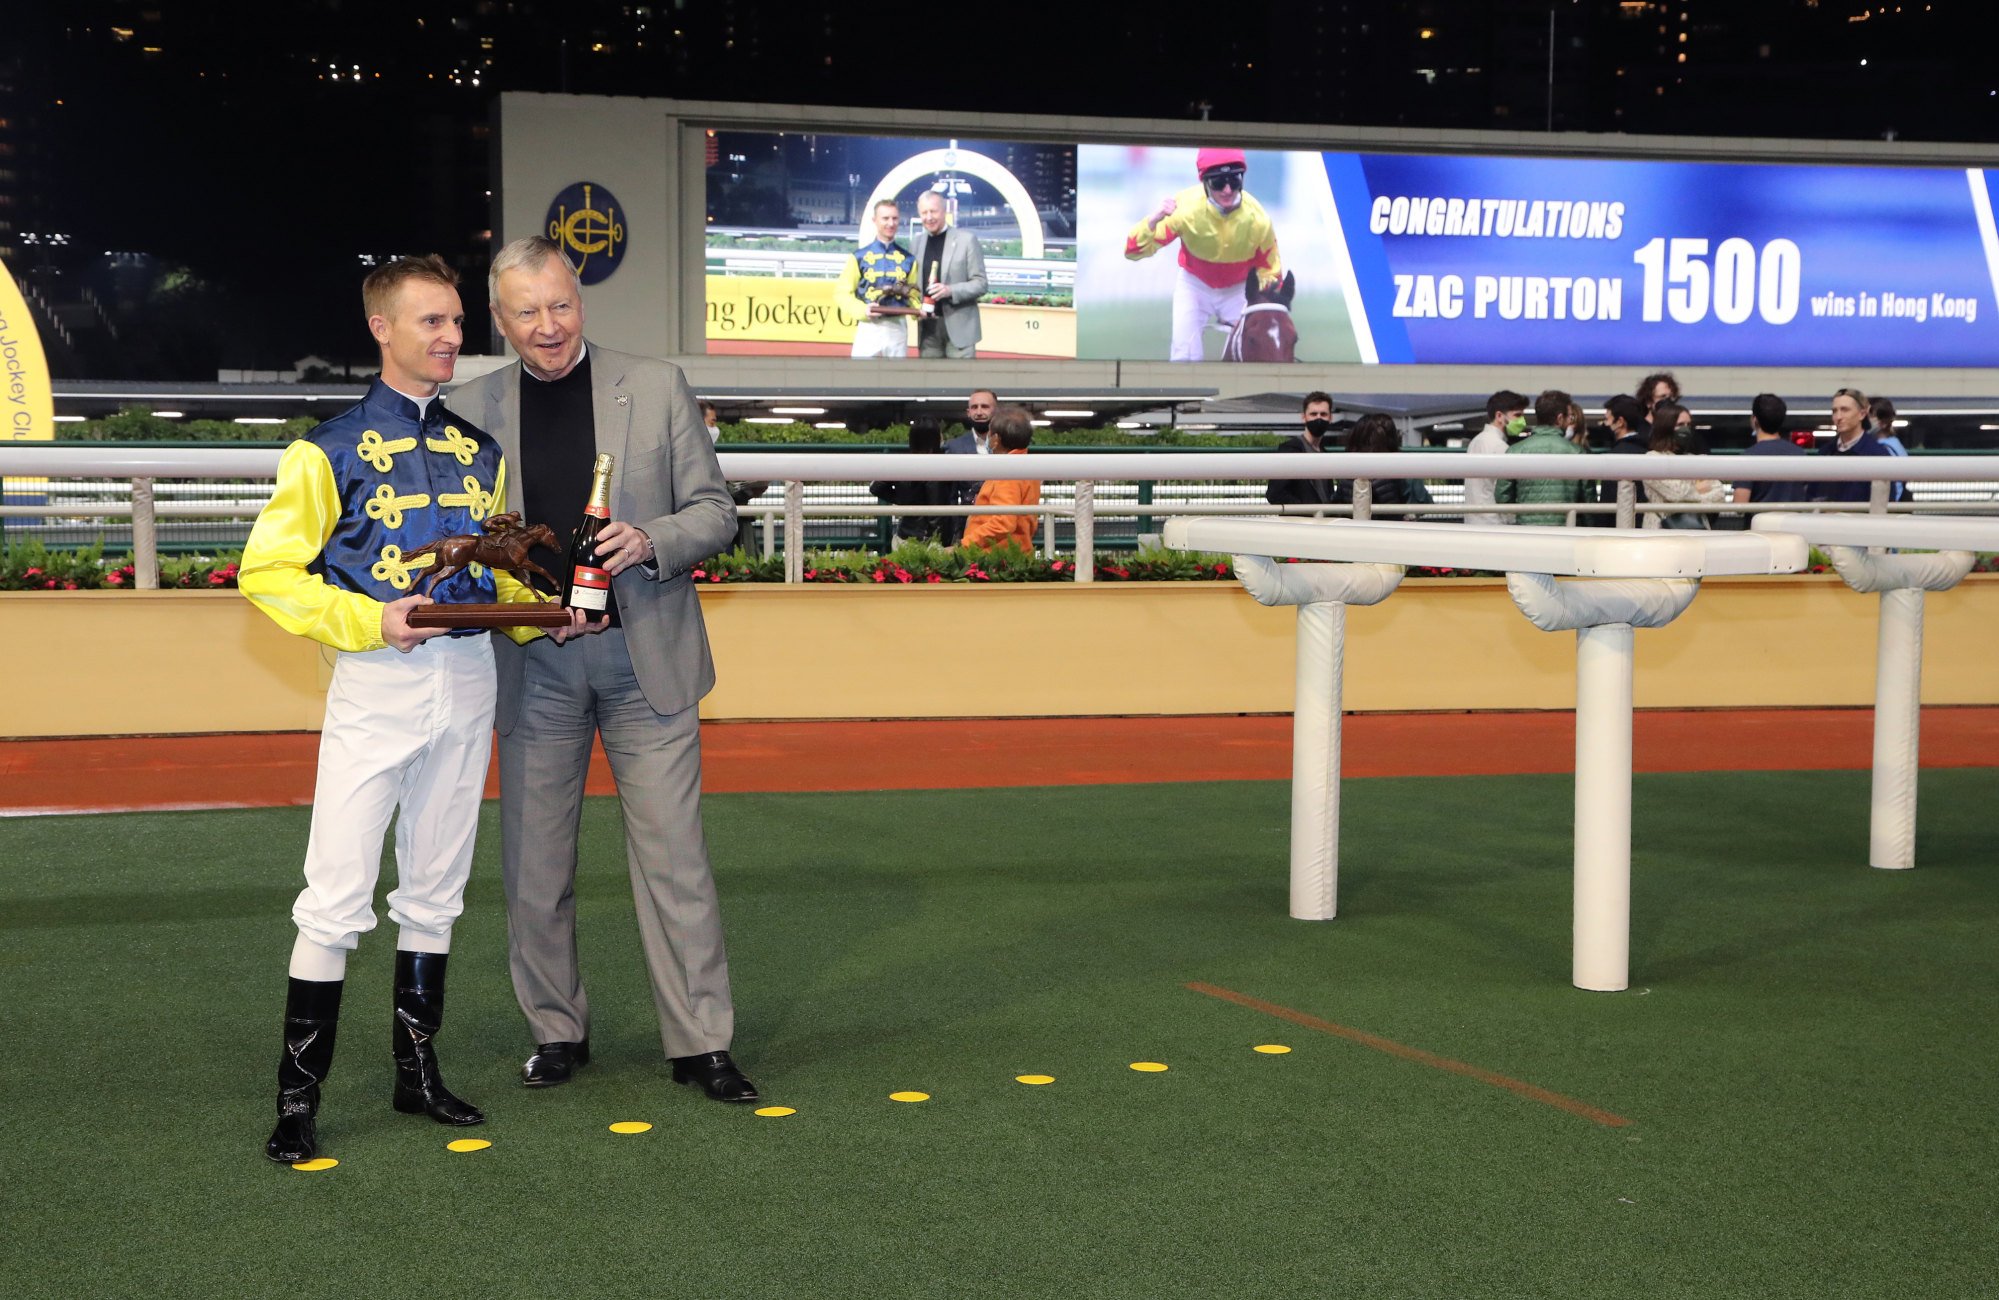 Jockey Club chief executive Winfried Engelbrecht-Bresges presents Zac Purton with souvenirs to mark his 1,500 wins in Hong Kong.